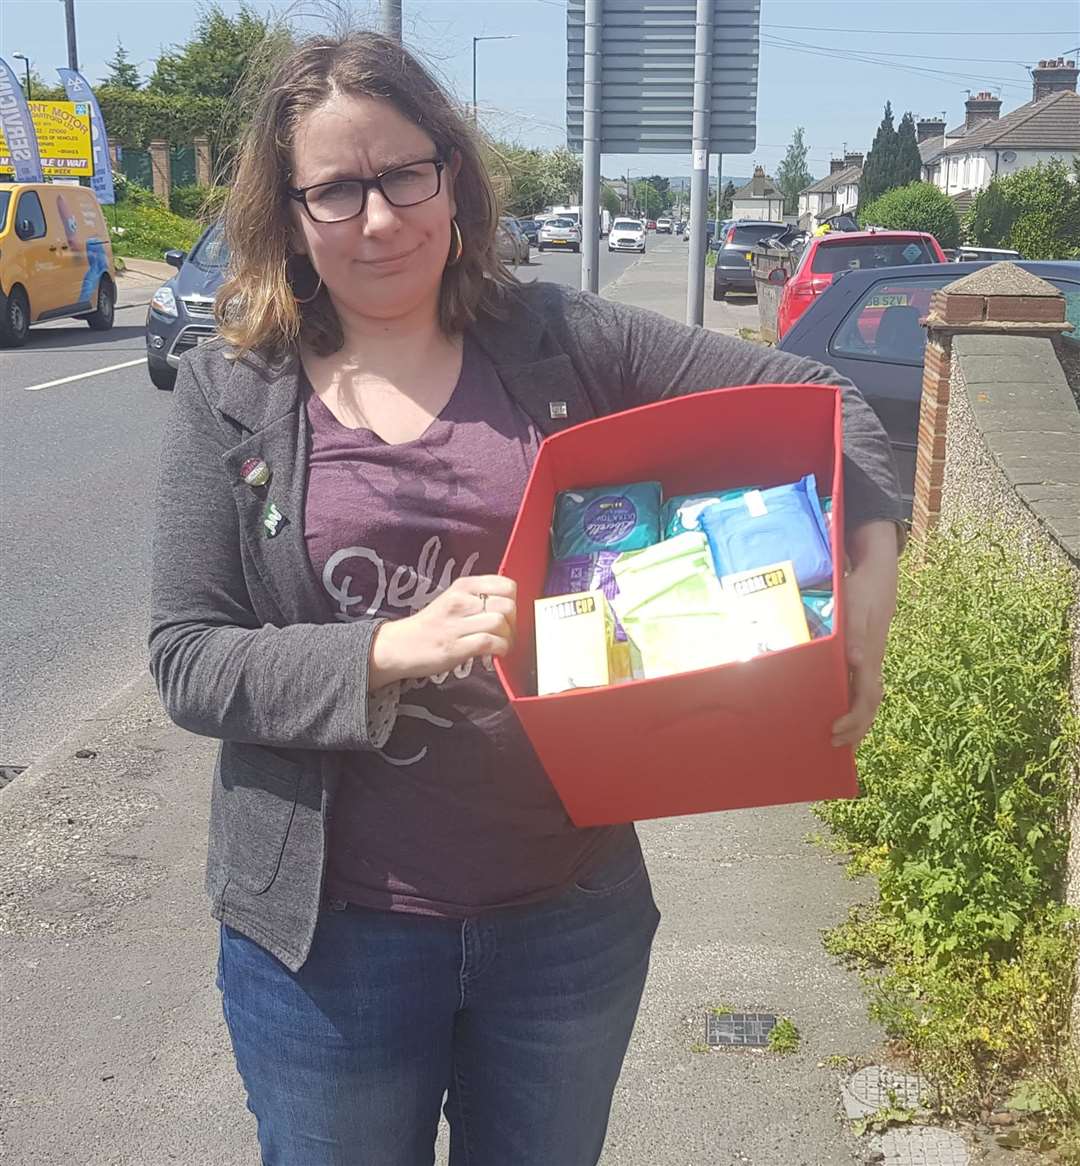 Co-founder of Dartford Deeds Not Words Kelly Grehan with sanitary products collected as part of the Dartford Red Box project